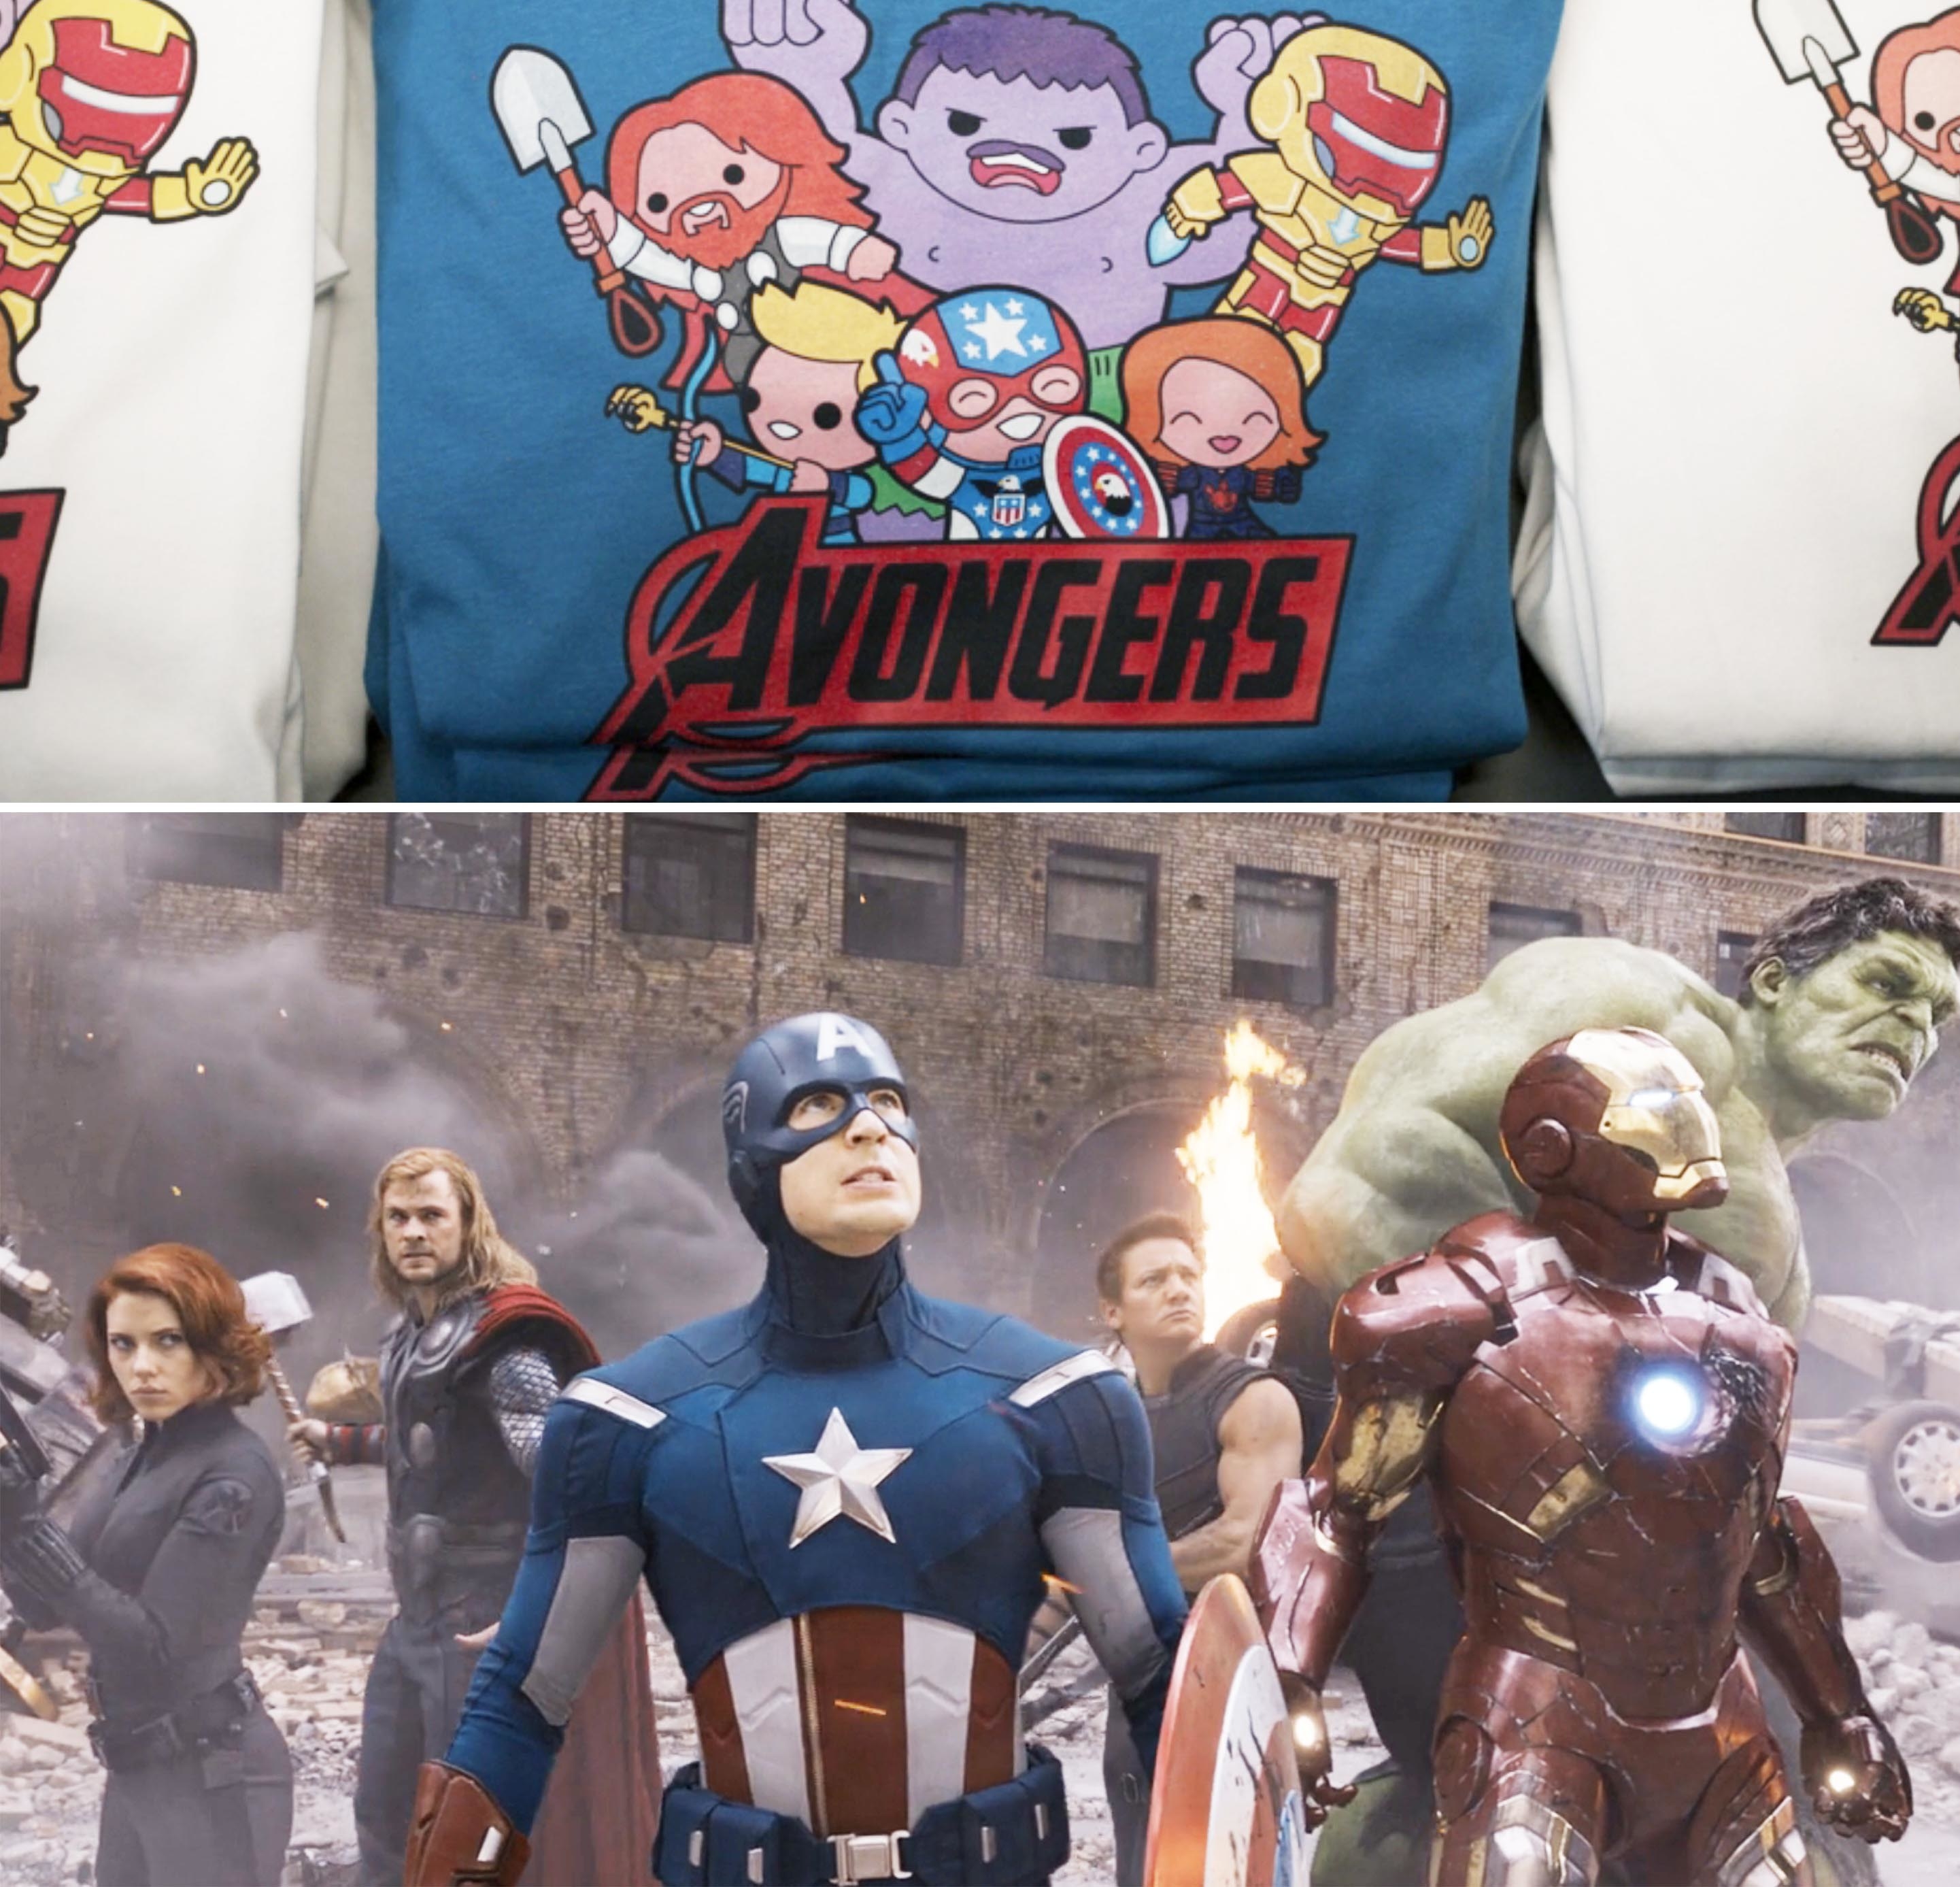 A knockoff Avengers shirt that says Avongers instead, juxtaposed next to a picture of the real Avengers